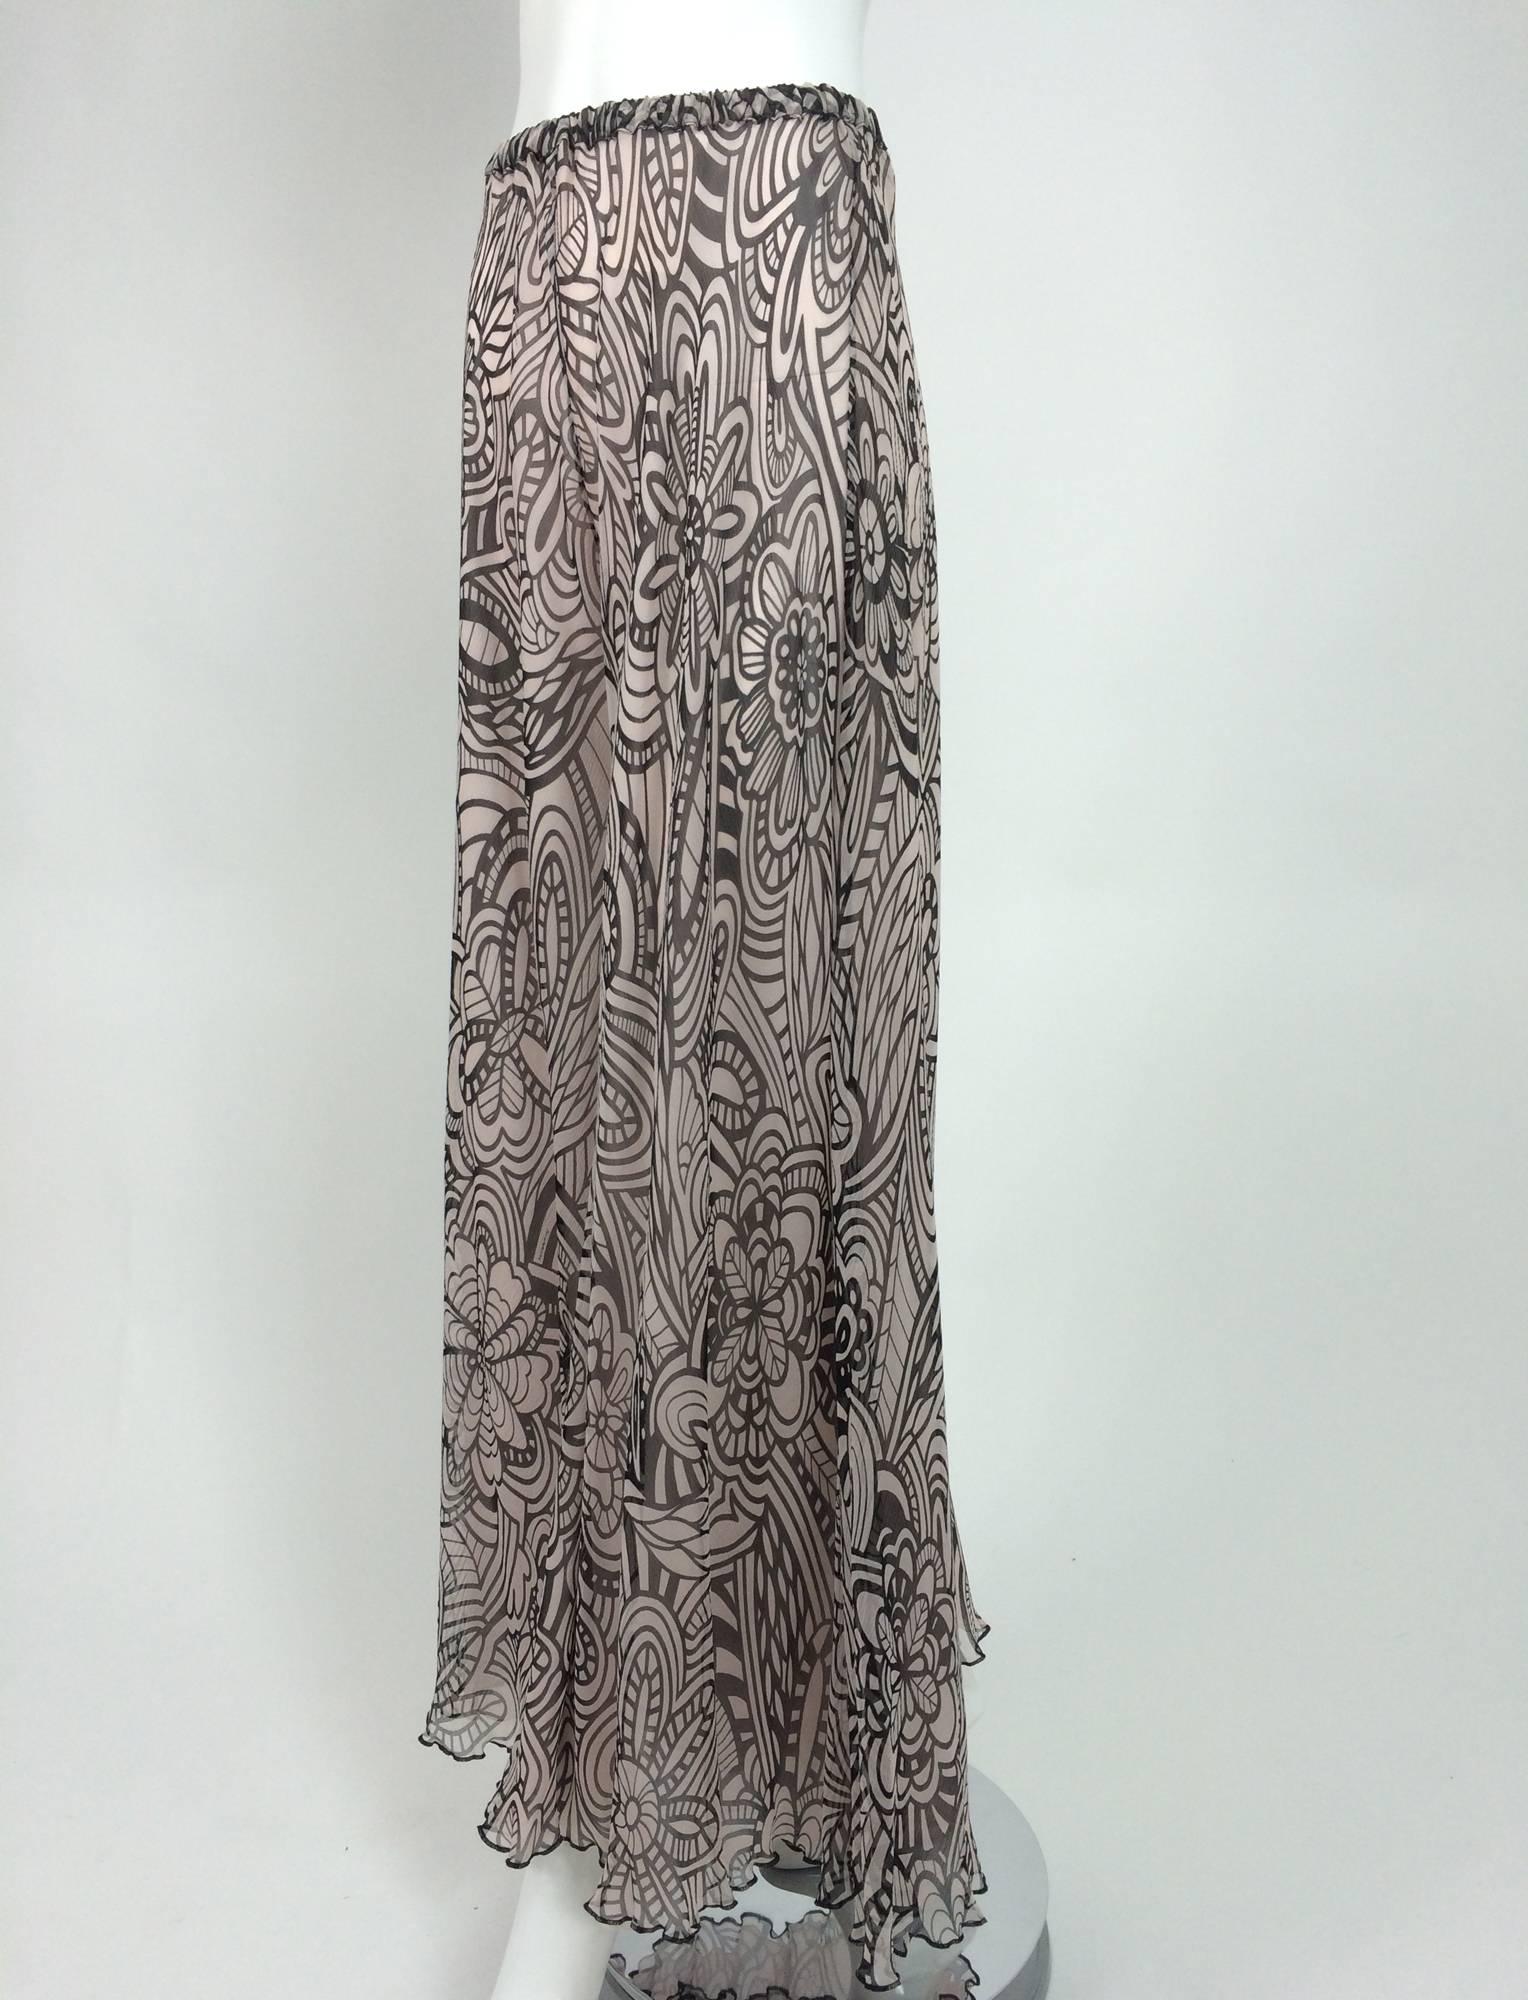 Missoni black & white floral silk chiffon palazzo pant...Fabulous wide leg silk chiffon trouser in a black & cream floral design...Pull on with elastic waist...Fully lined in pale, pale pink chiffon...Fits a size small...

In excellent wearable